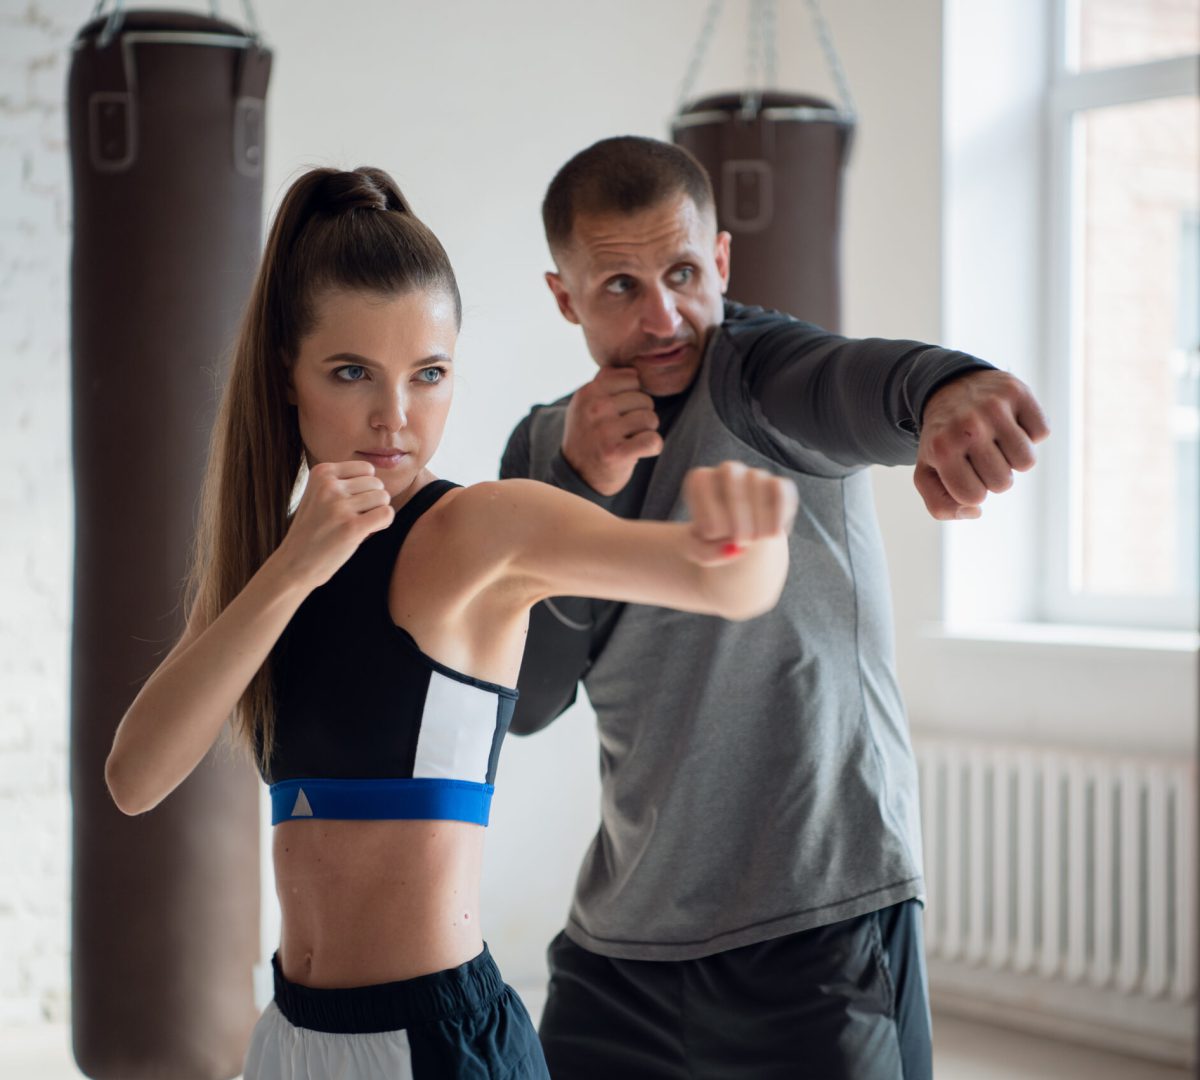 In a spacious loft, a male trainer and his female mentee conduct a boxing training session.